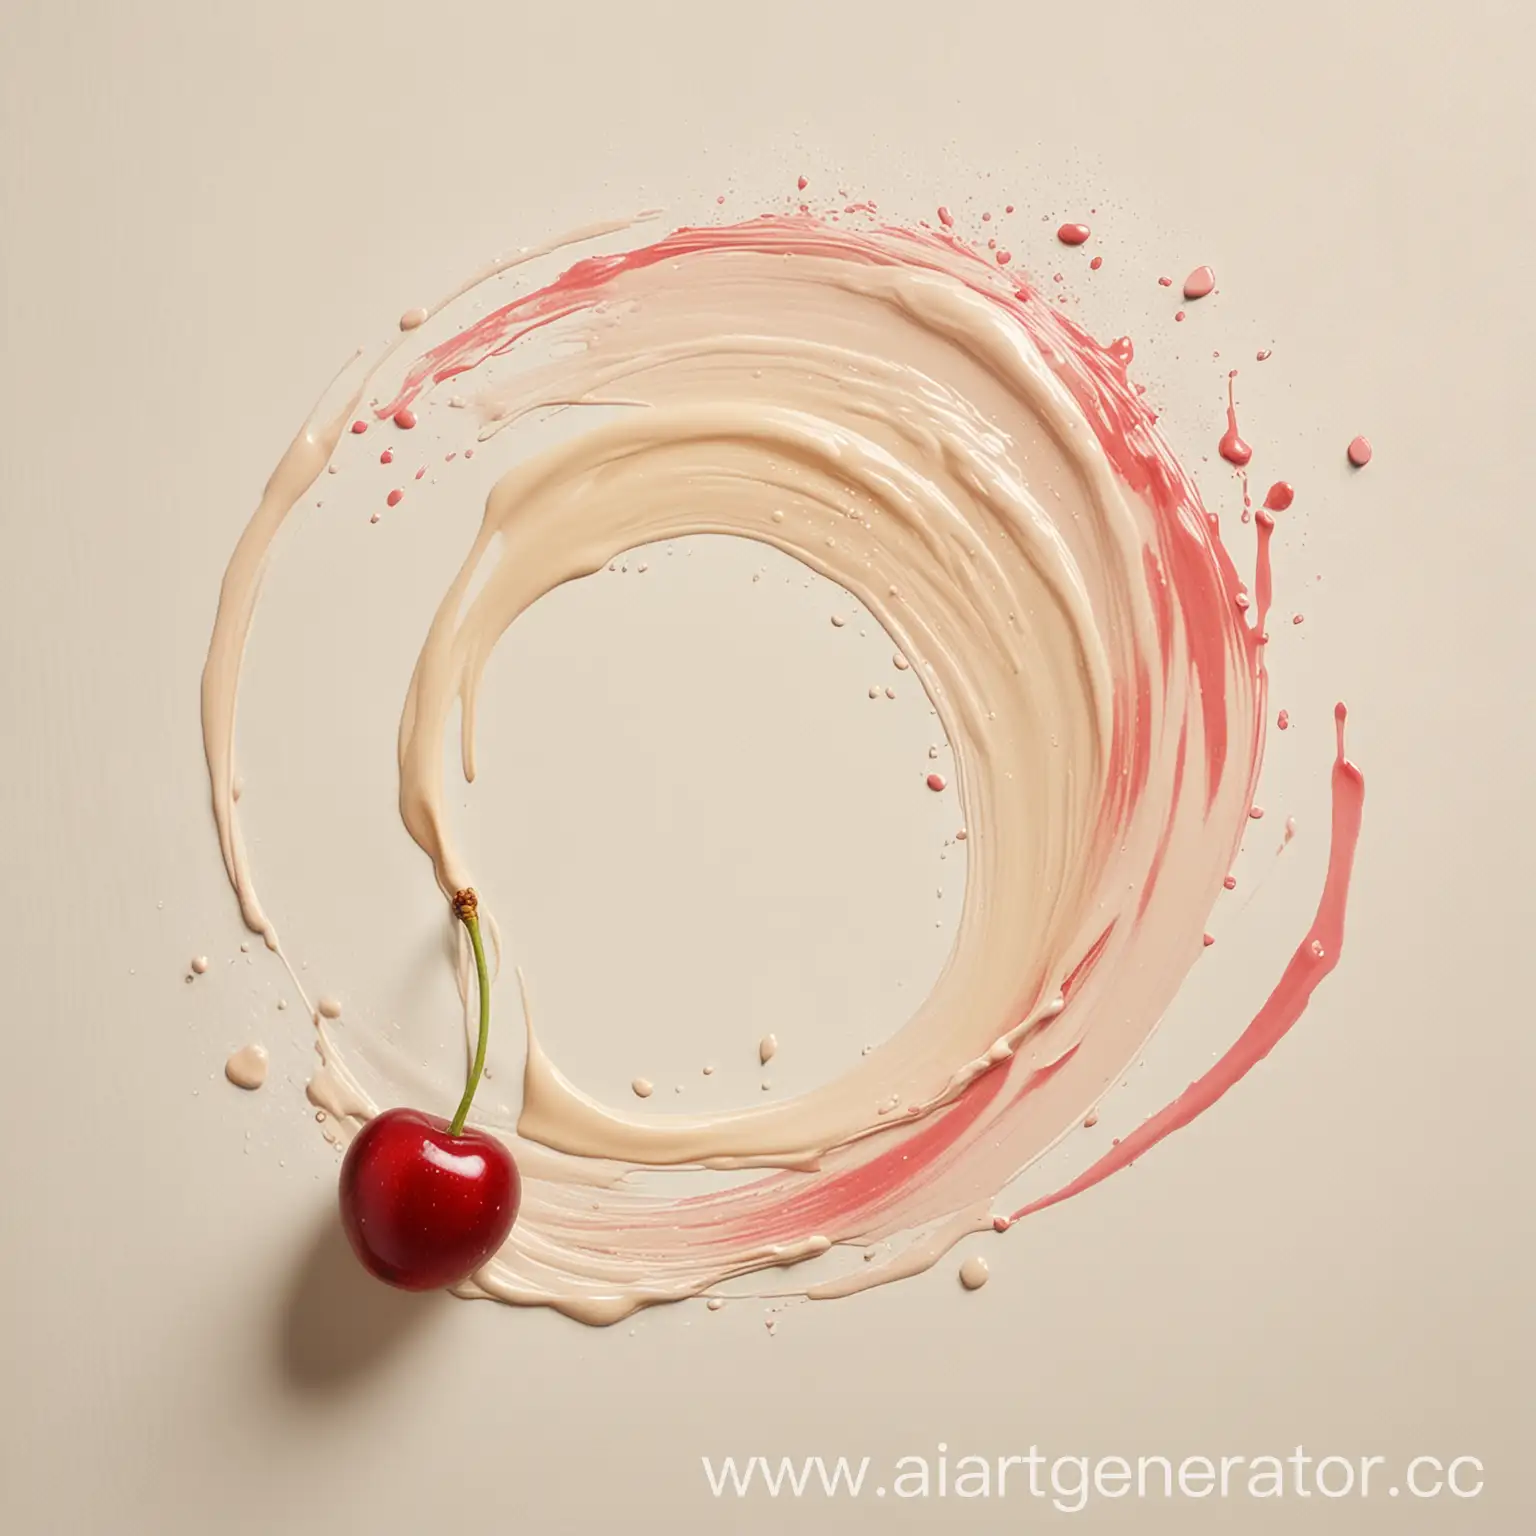 Abstraction to the smell of «Vanilla cherry»